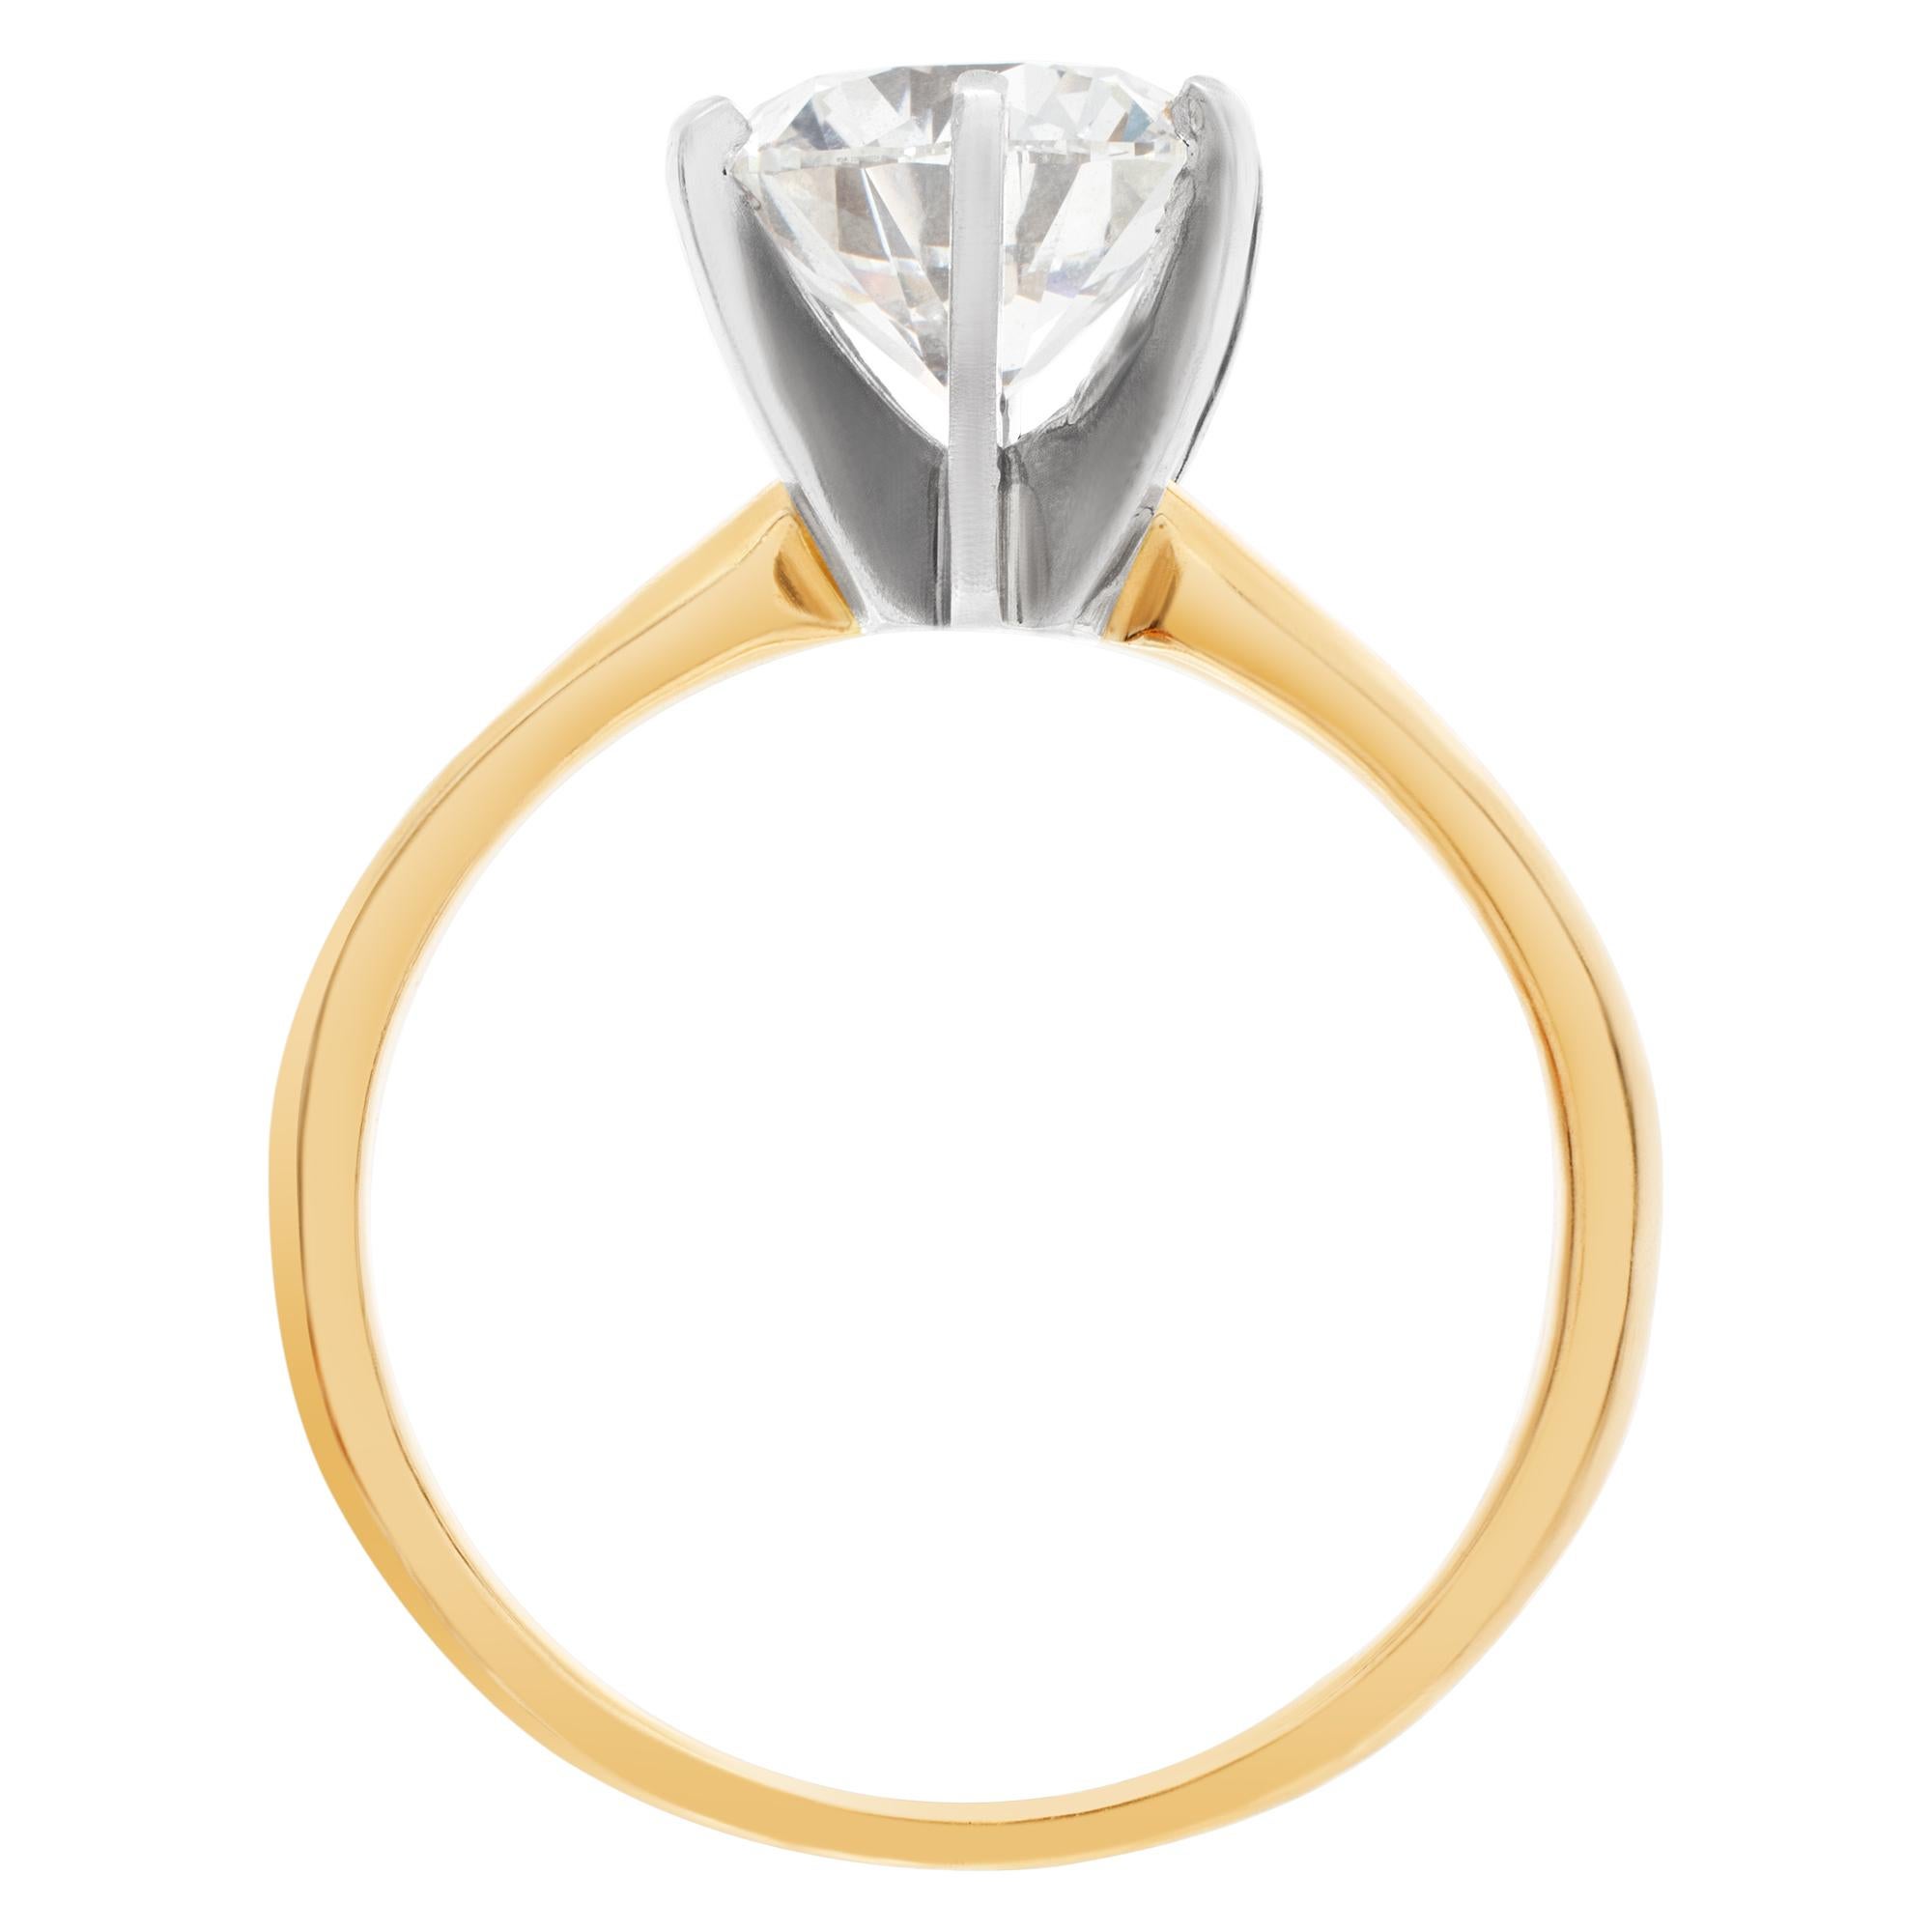 Women's Solitaire Ring 14k Yellow Gold, GIA Certified Round Brilliant Cut Diamond 2.02 For Sale